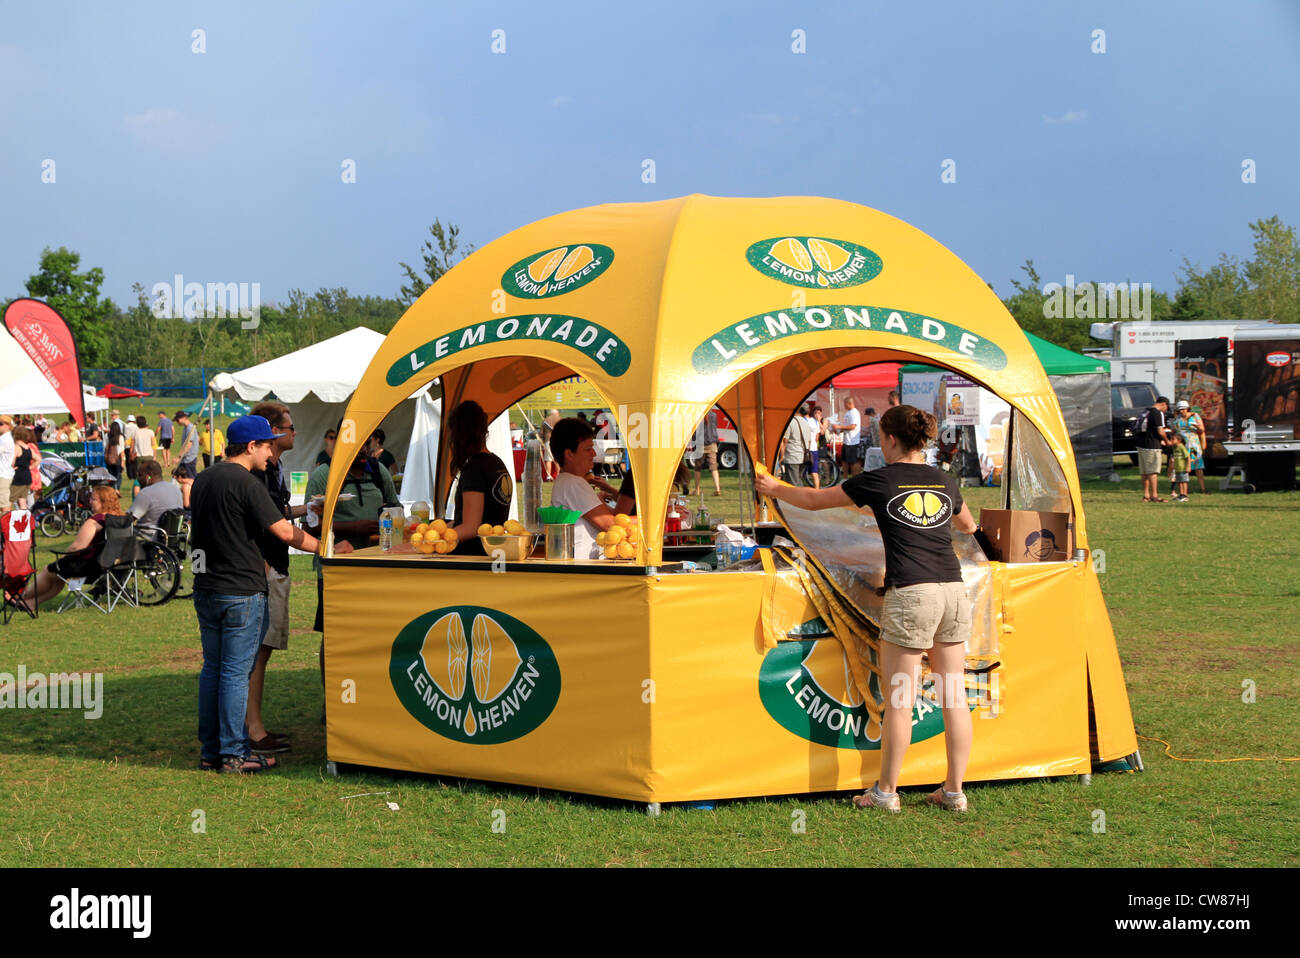 A lemonade stand during an outdoor festival in Toronto Stock Photo